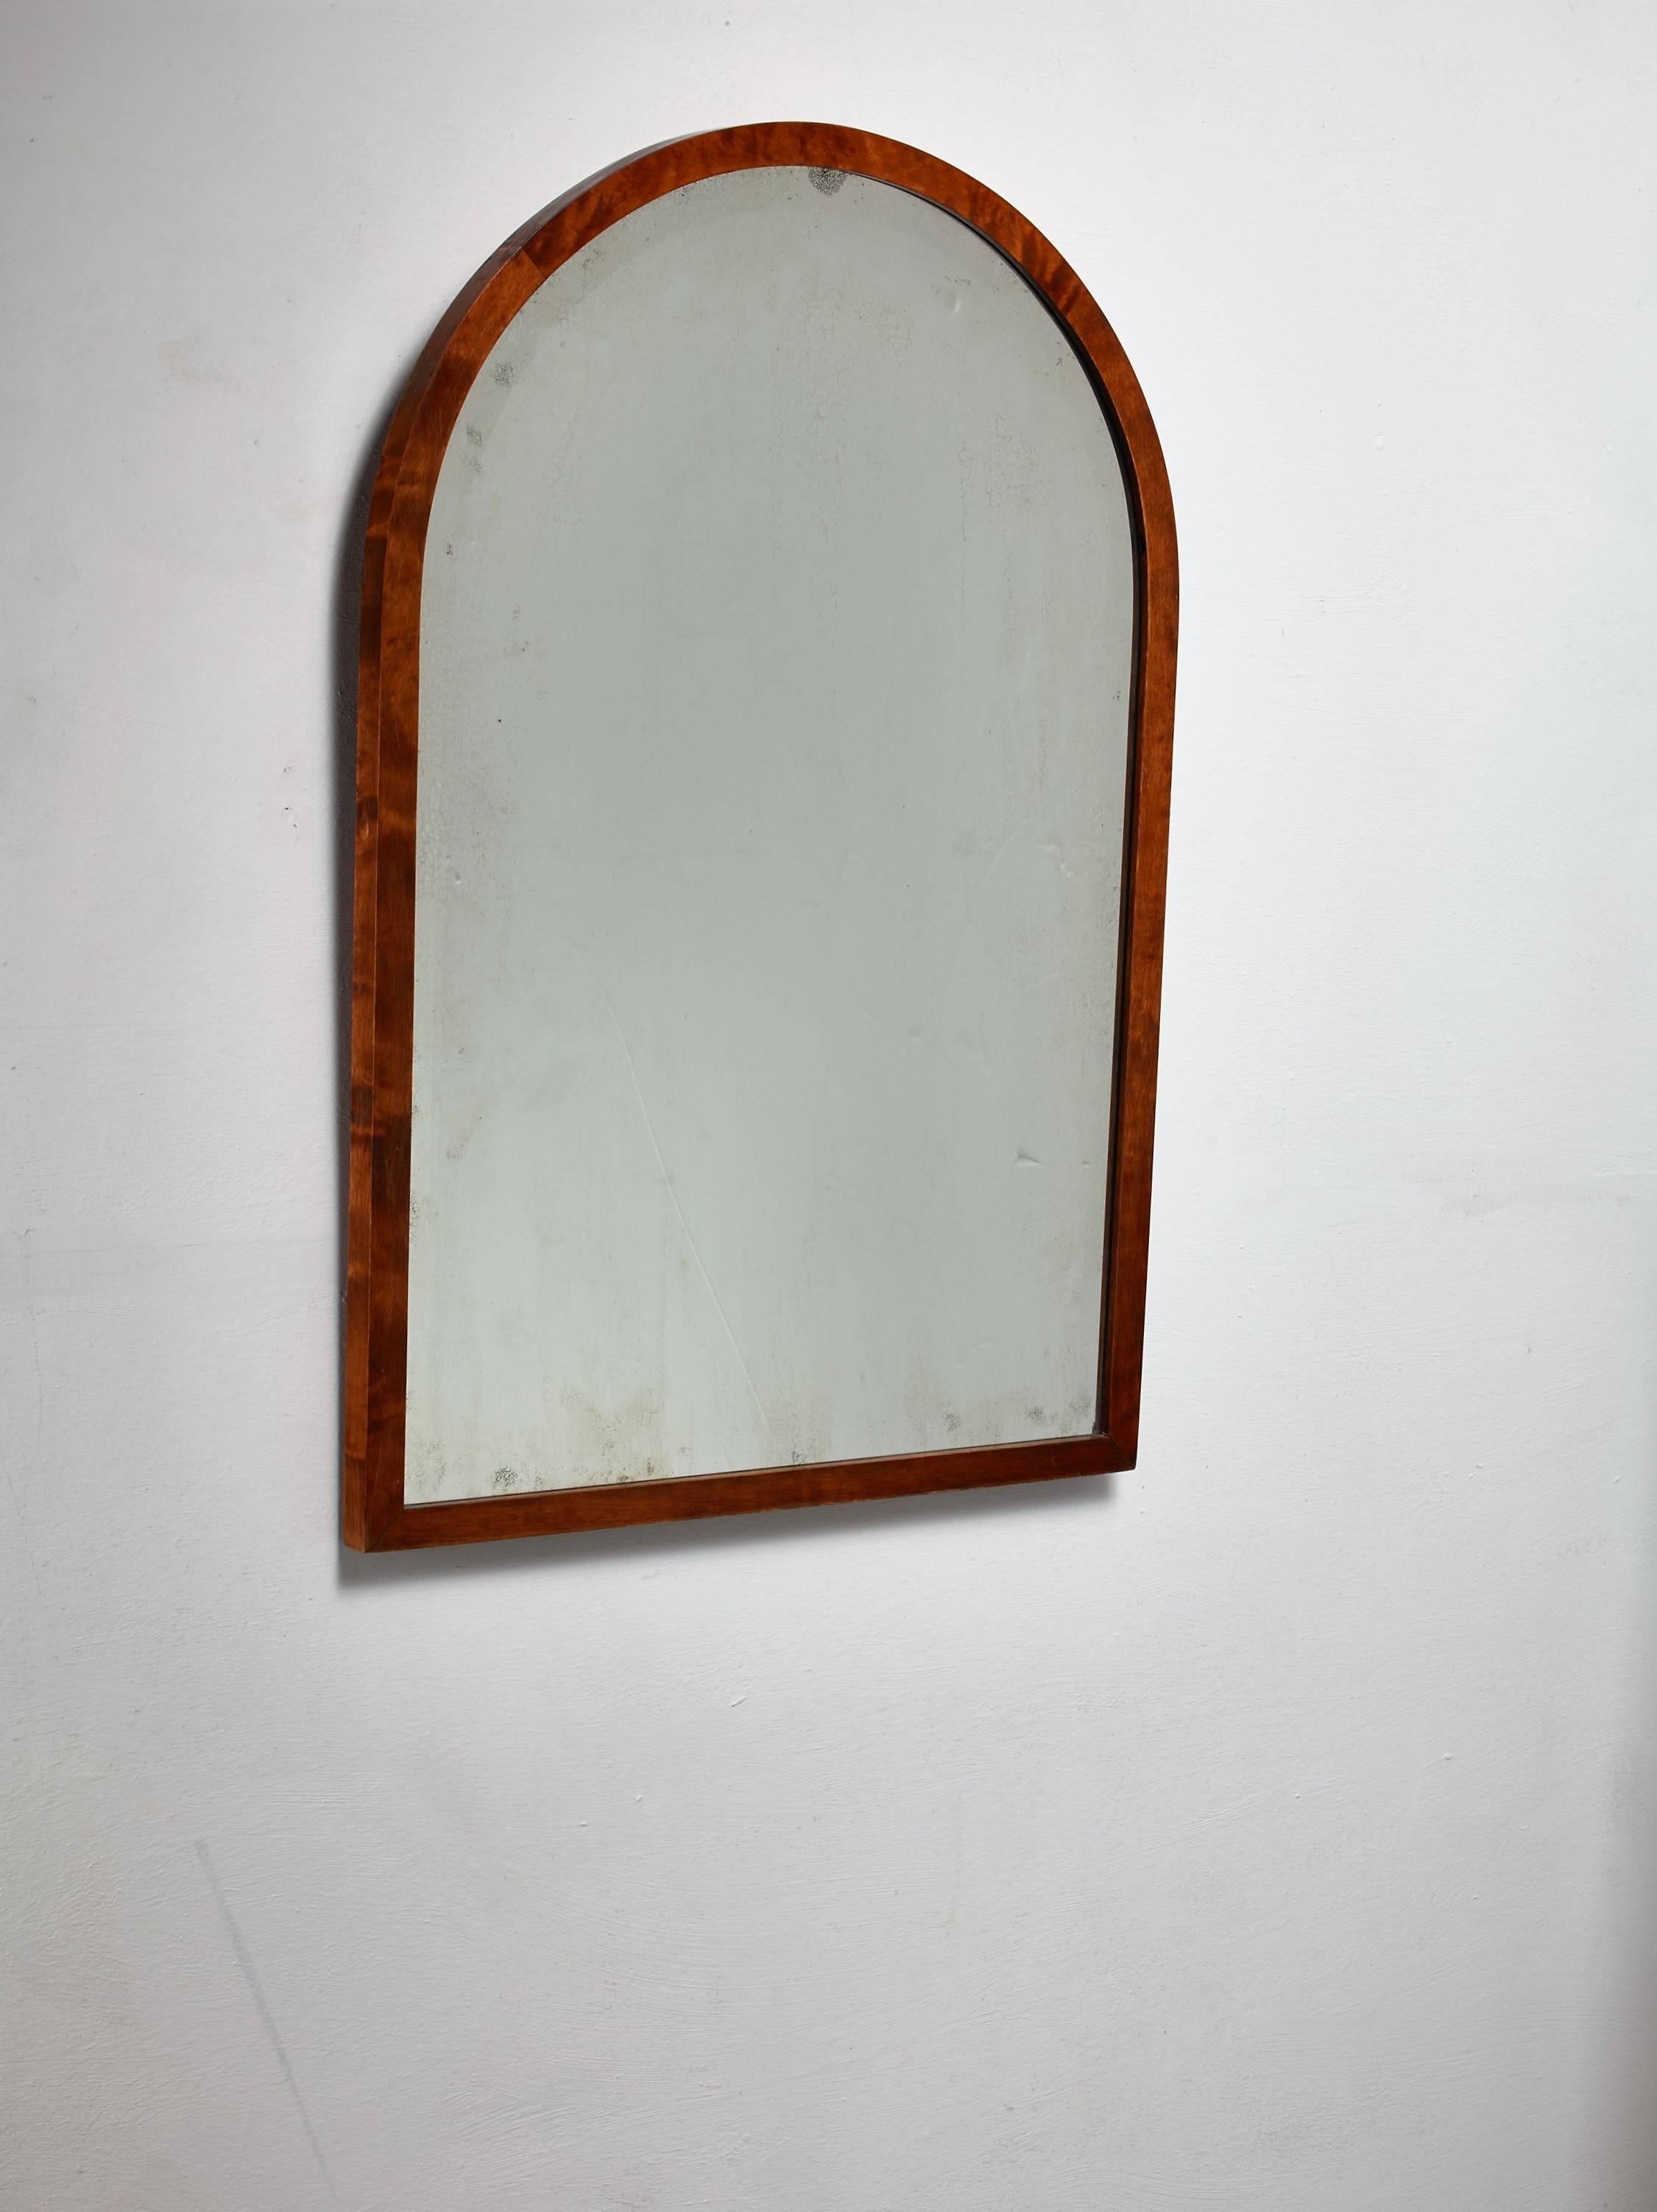 A Swedish wall mirror by Svenska Möbelfabrikerna Bodafors. The mirror has an arched, stained birch frame.
Labelled by SMF and in a very good condition.

